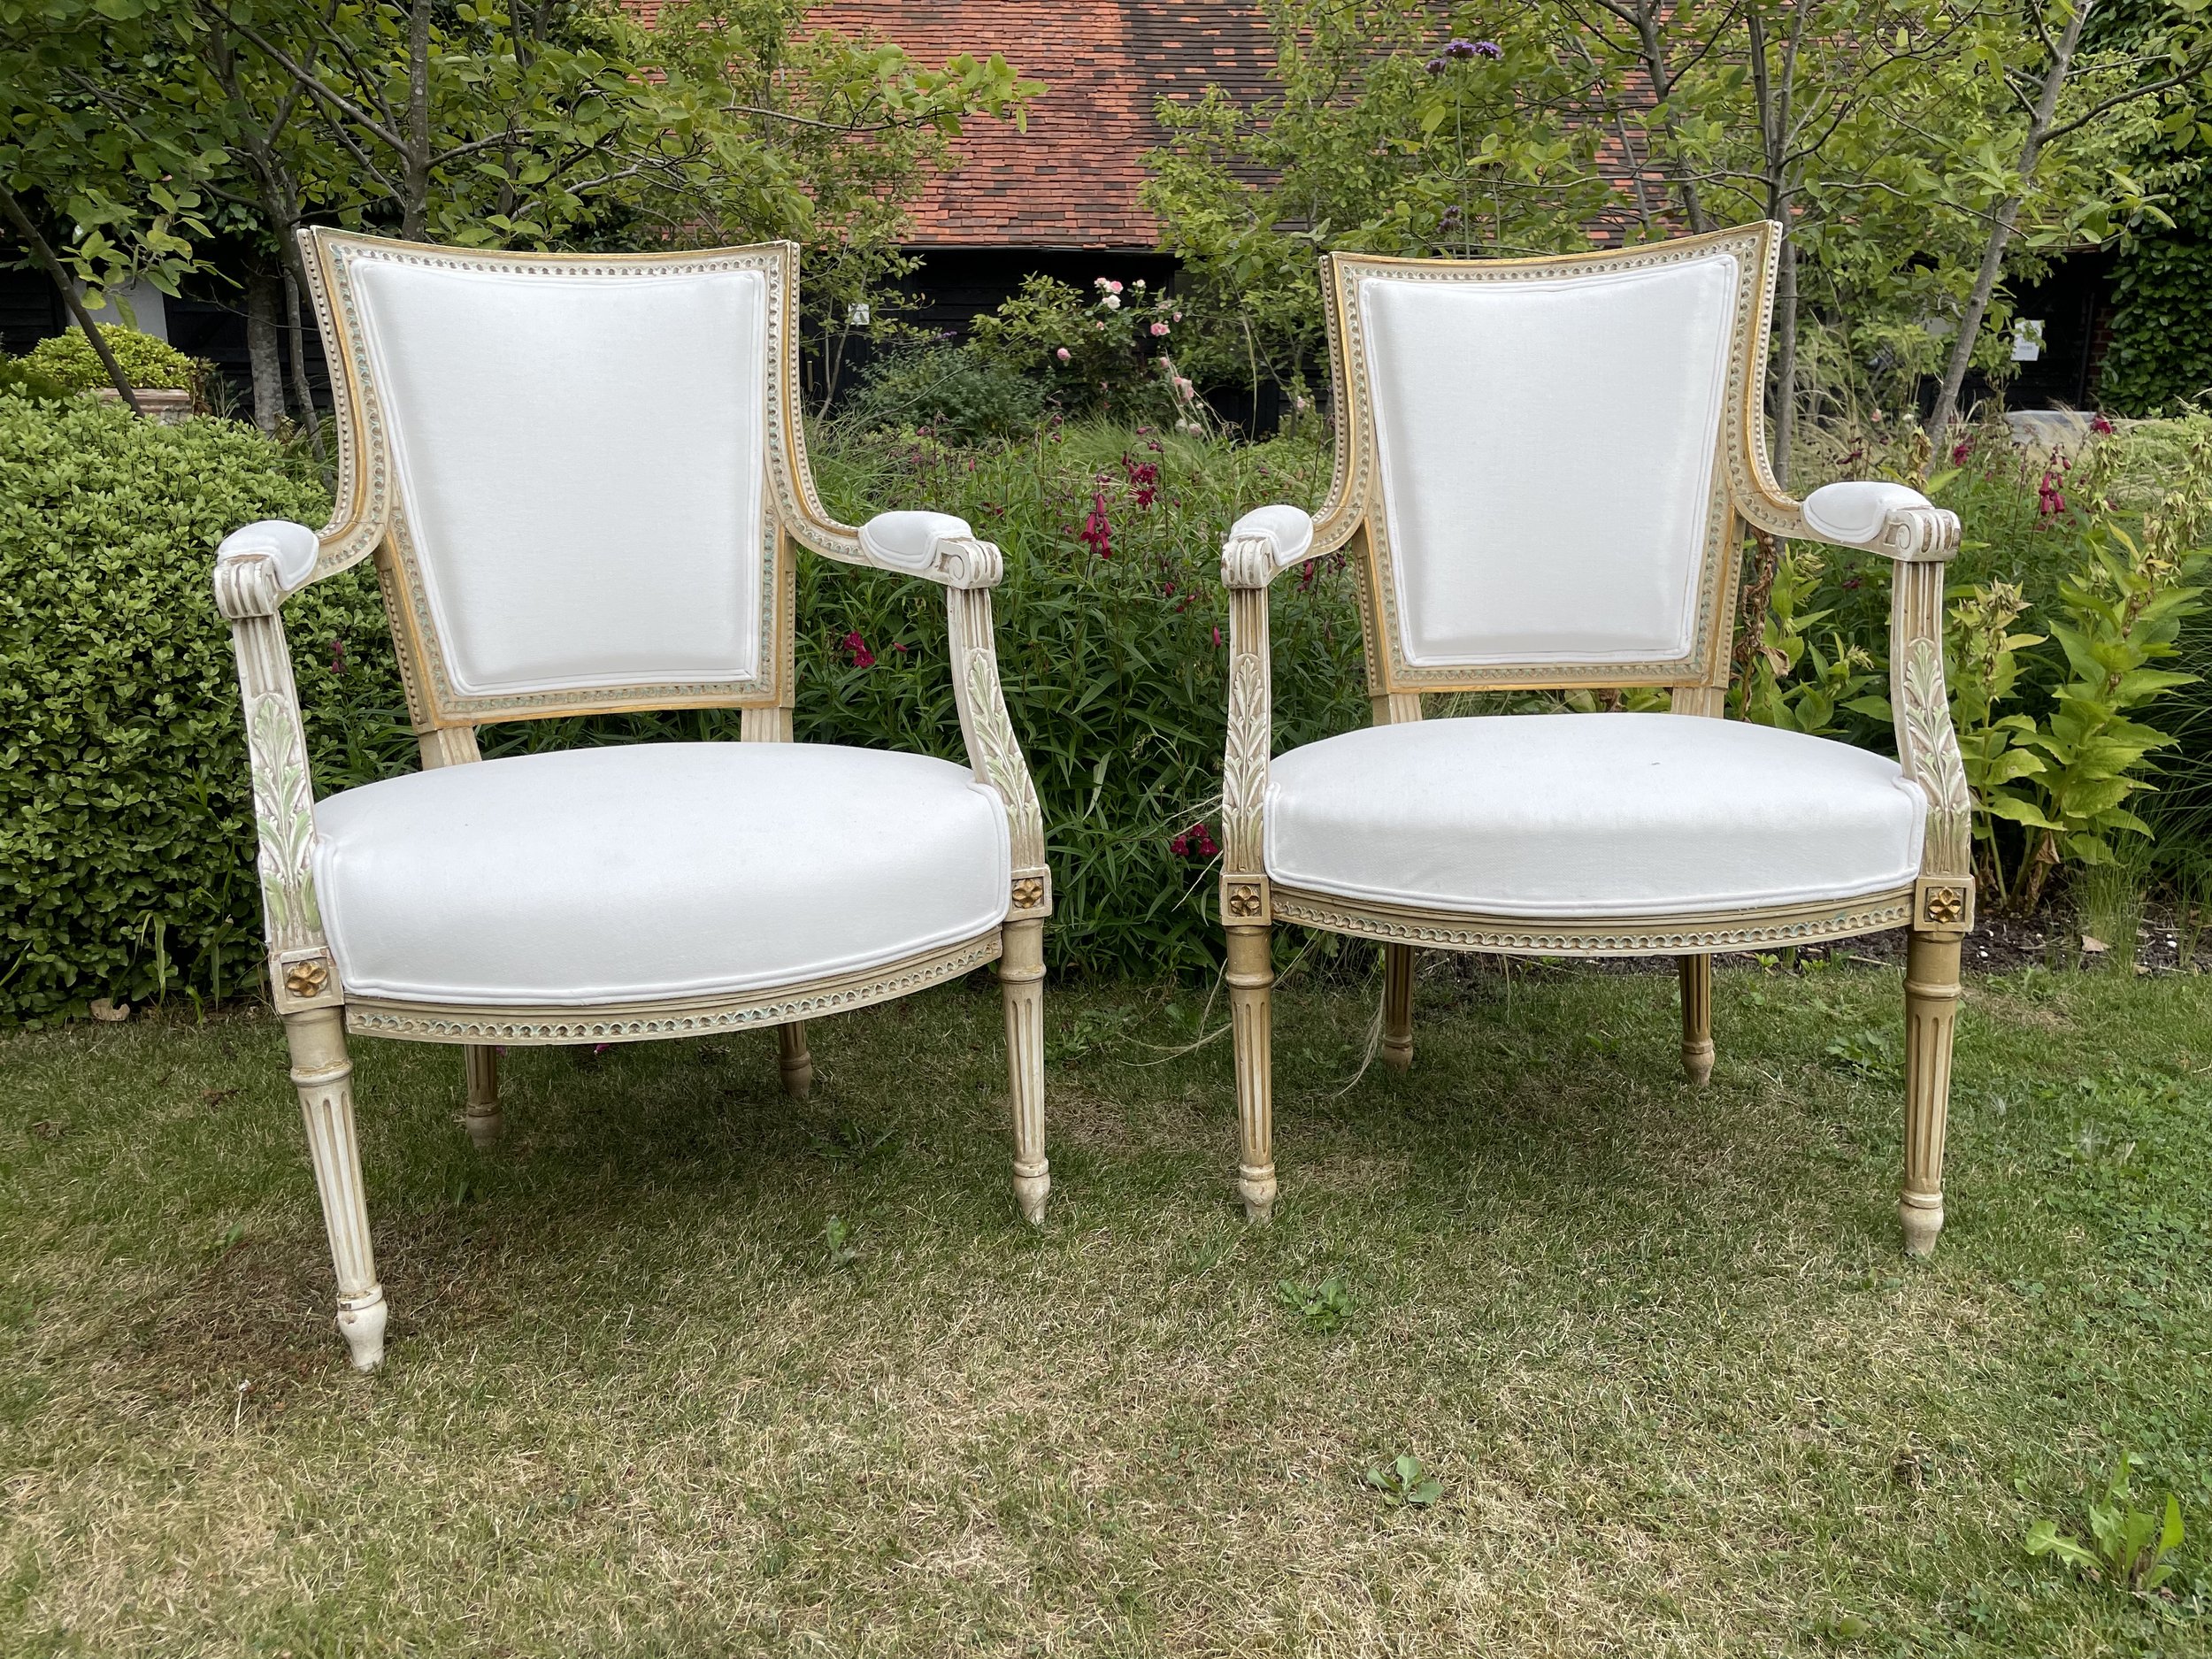 Pair of 19th Century French Chairs – £1,450